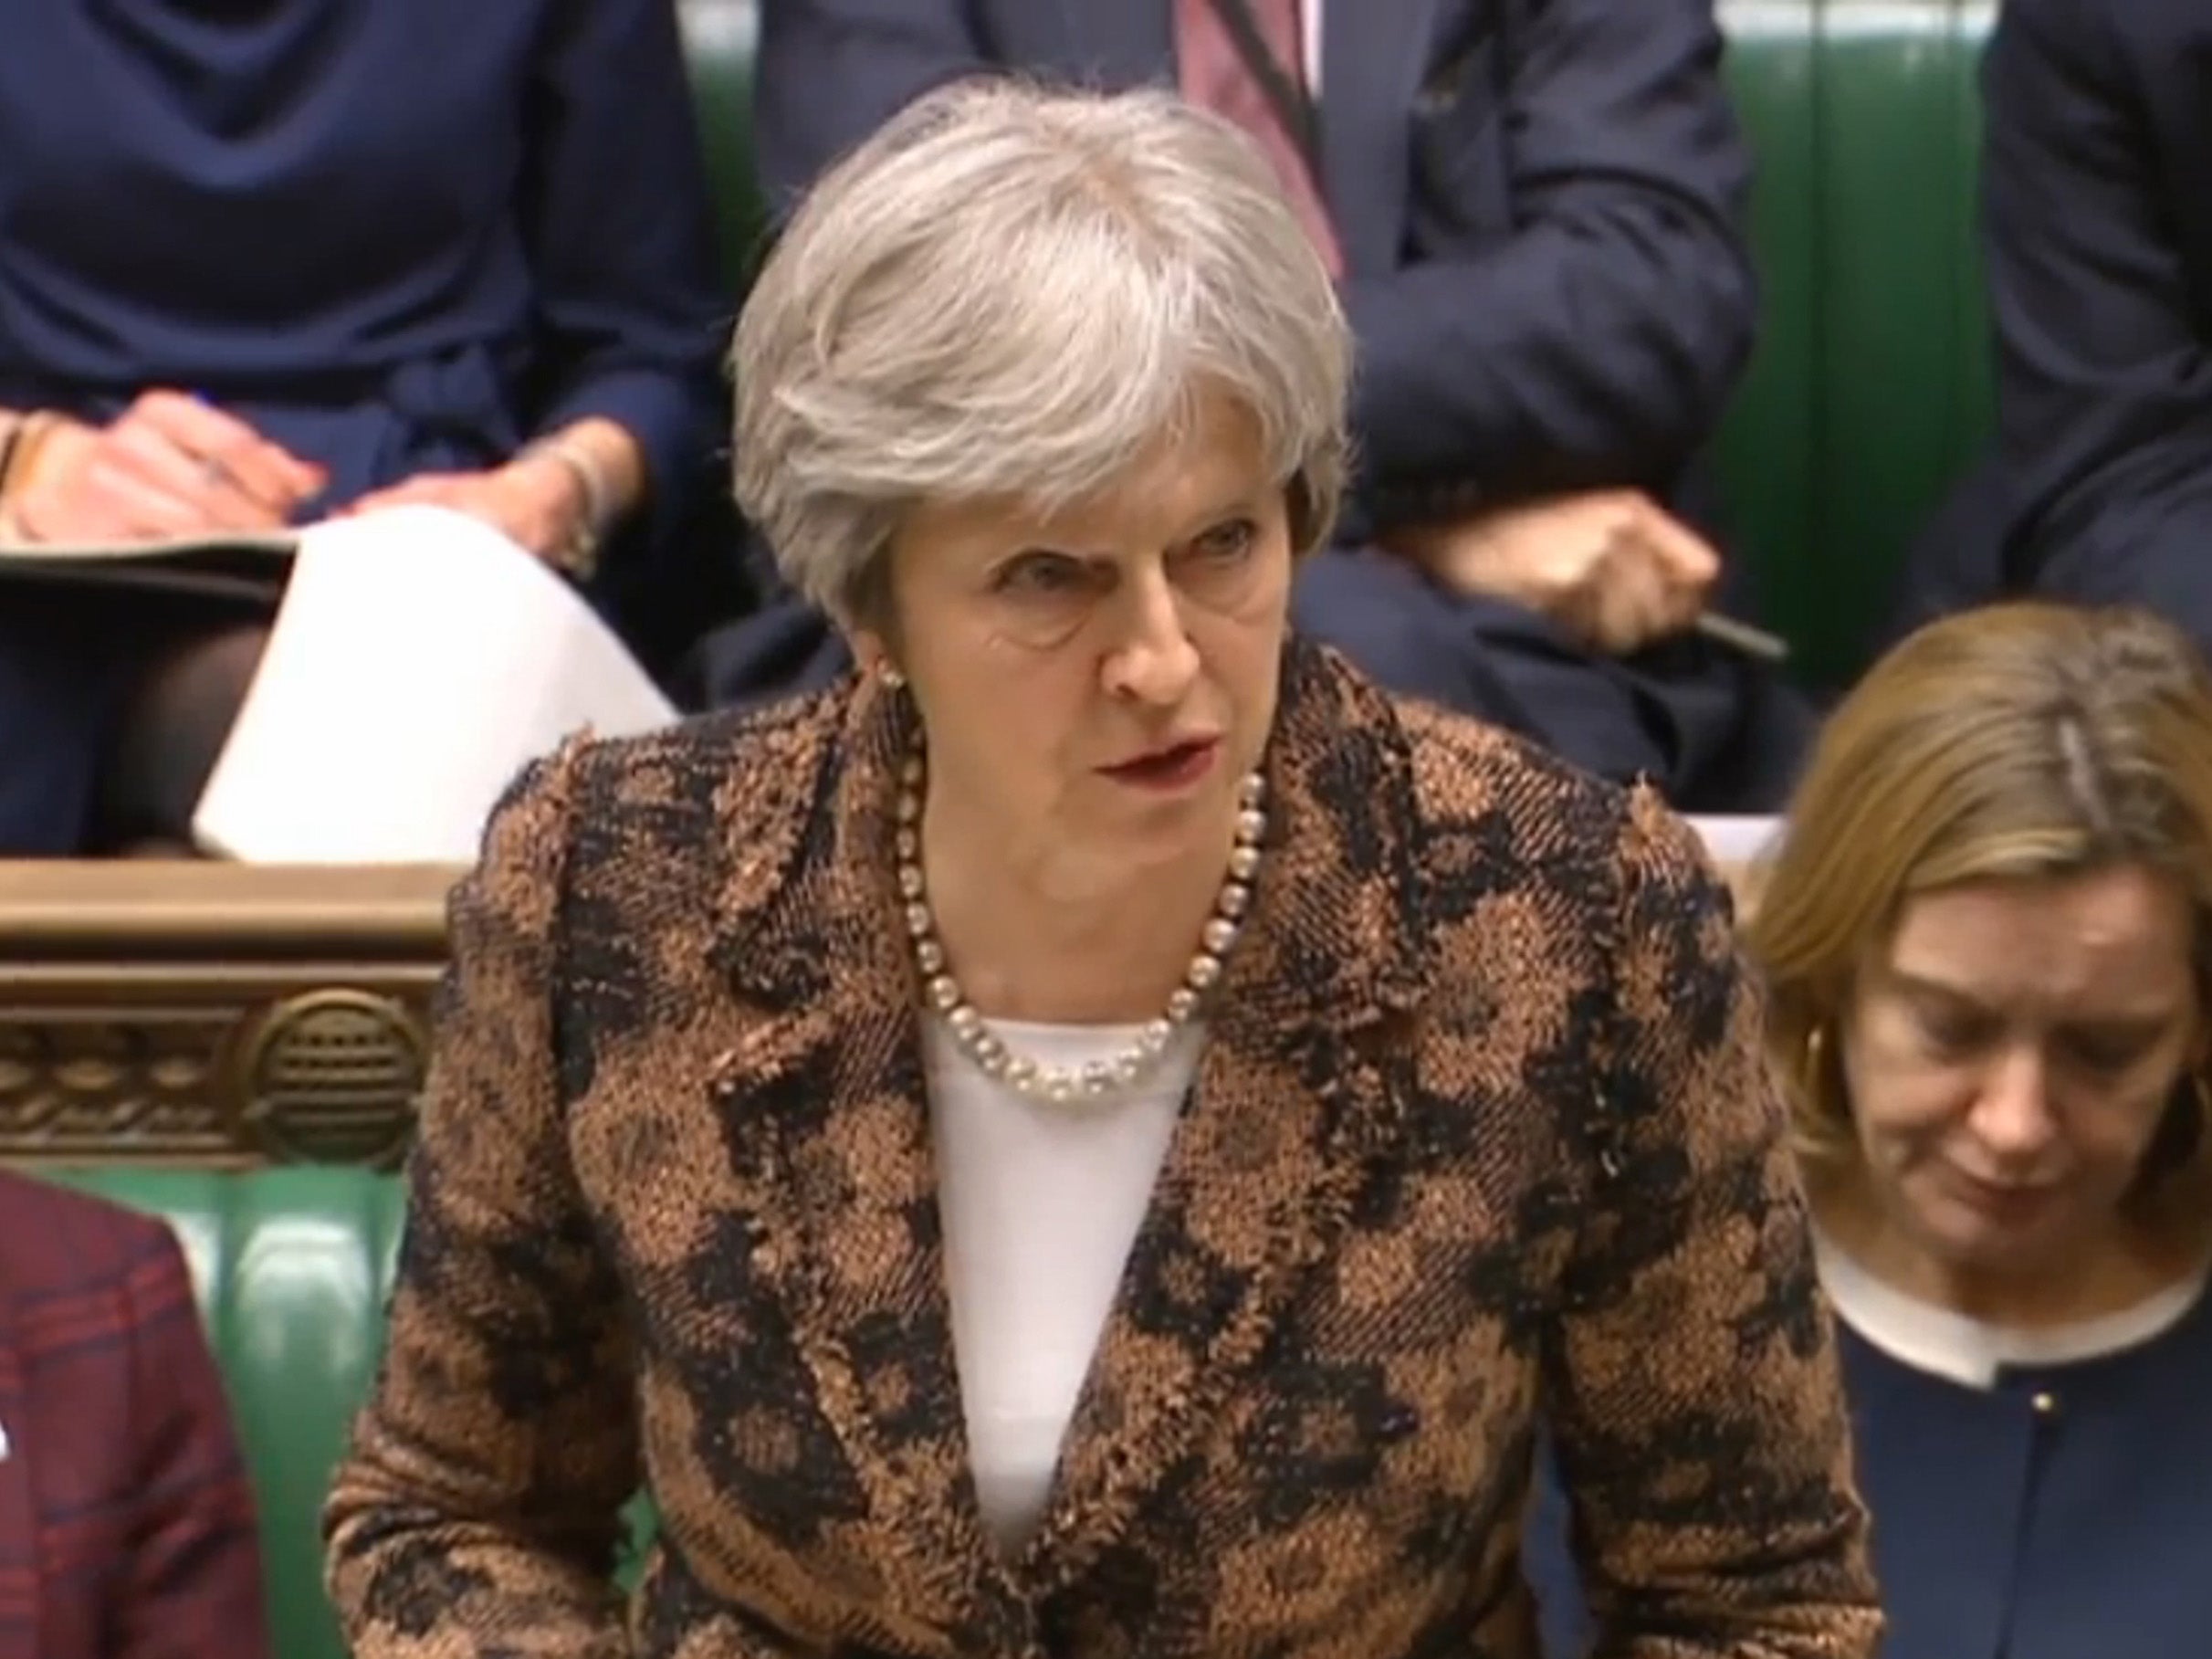 The attempted assassination of Mr Skripal is not only an unacceptable and reprehensible assault in its own right, it is – as Ms May noted – a matter that impacts on the wider national interest